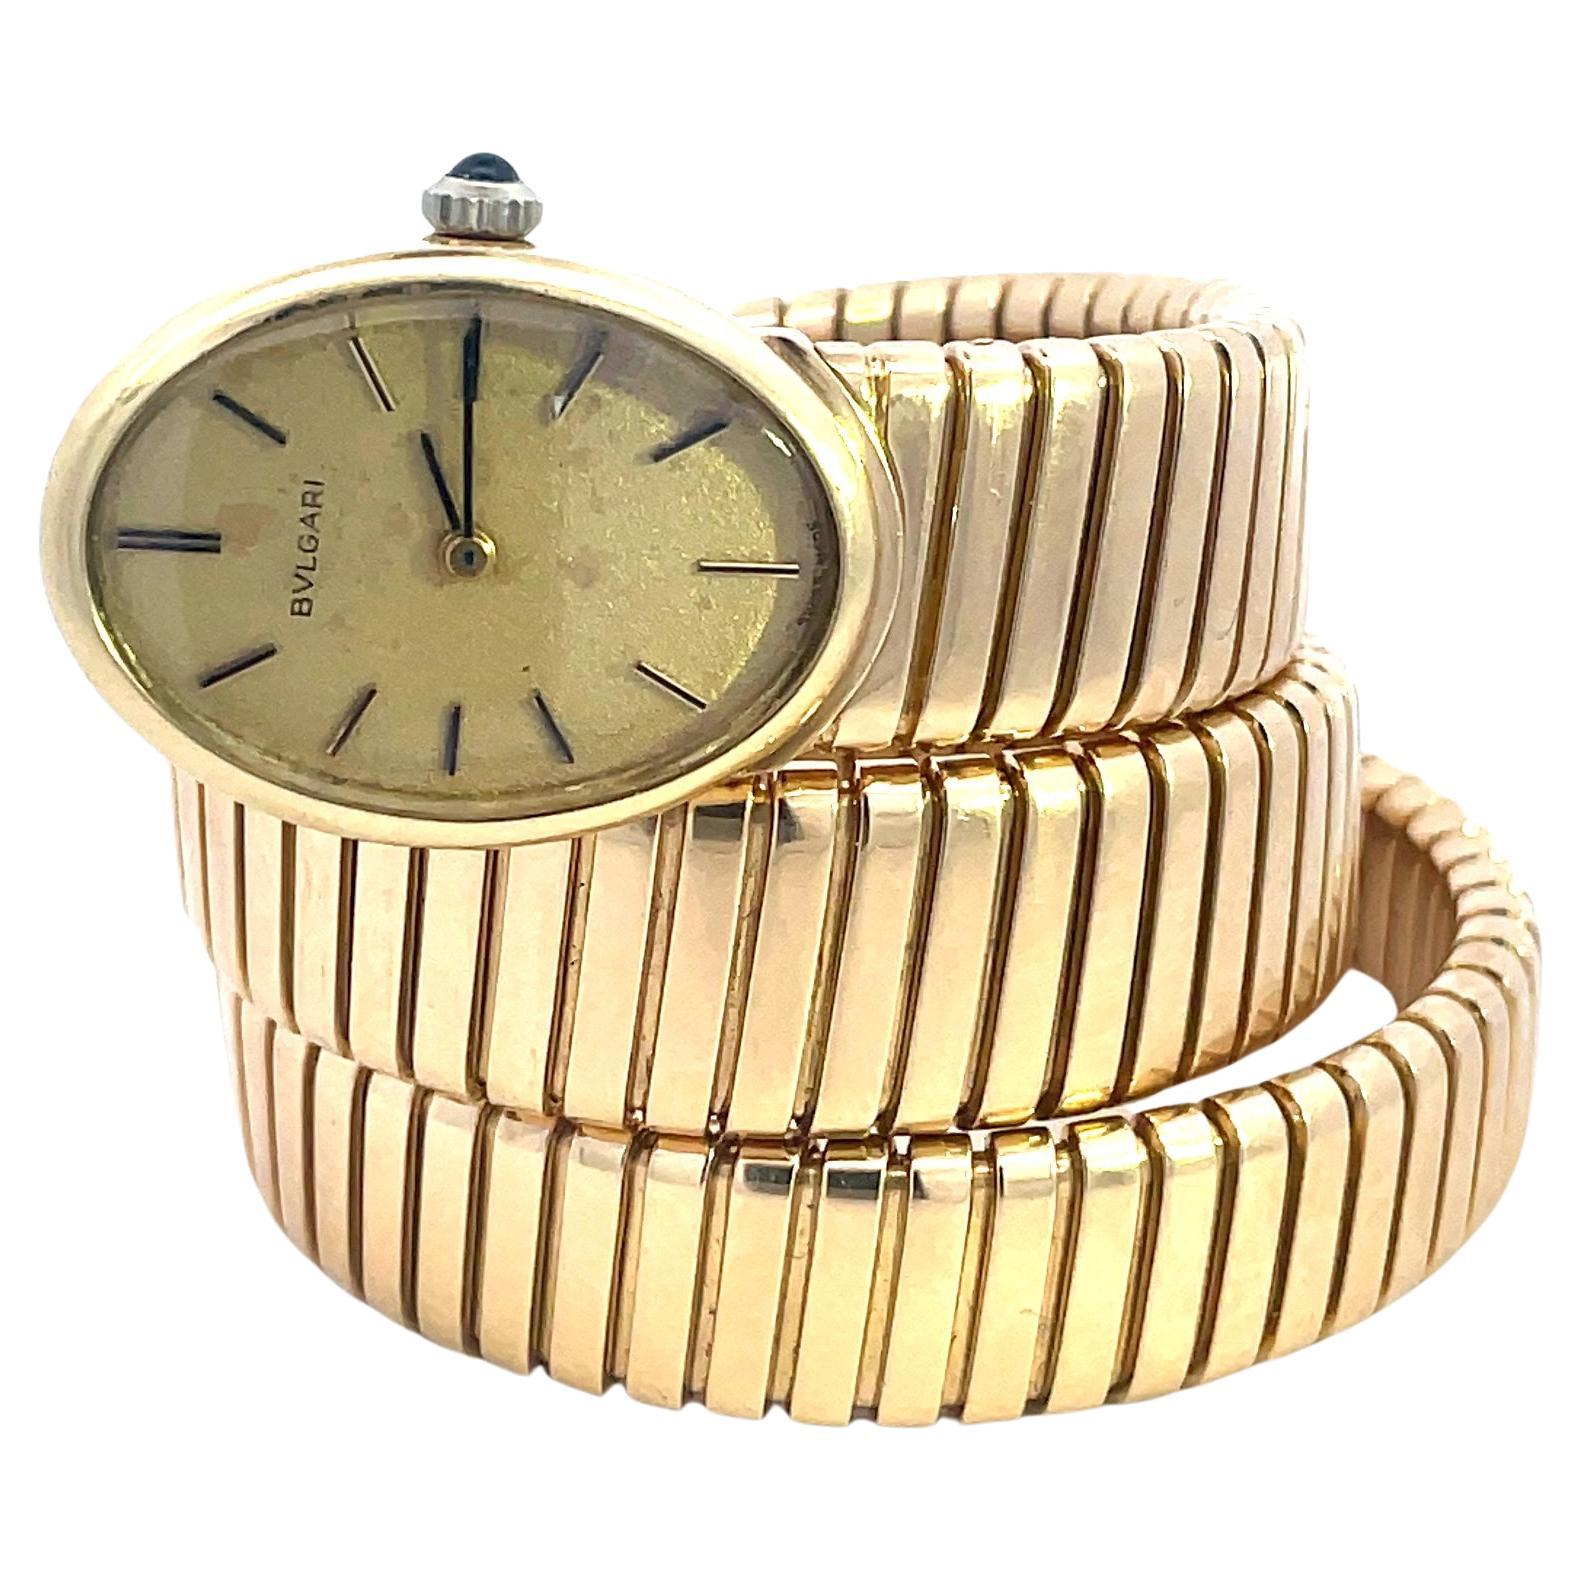 A rare Stunning Vintage Bulgari Tubogas watch, made of 18k yellow gold, circa 1965.
The gold watch features an Oval case with a Champagne matte dial. The dial equipped with the gold hands.
The Juvenia Manual winding is embellished with a cabochon